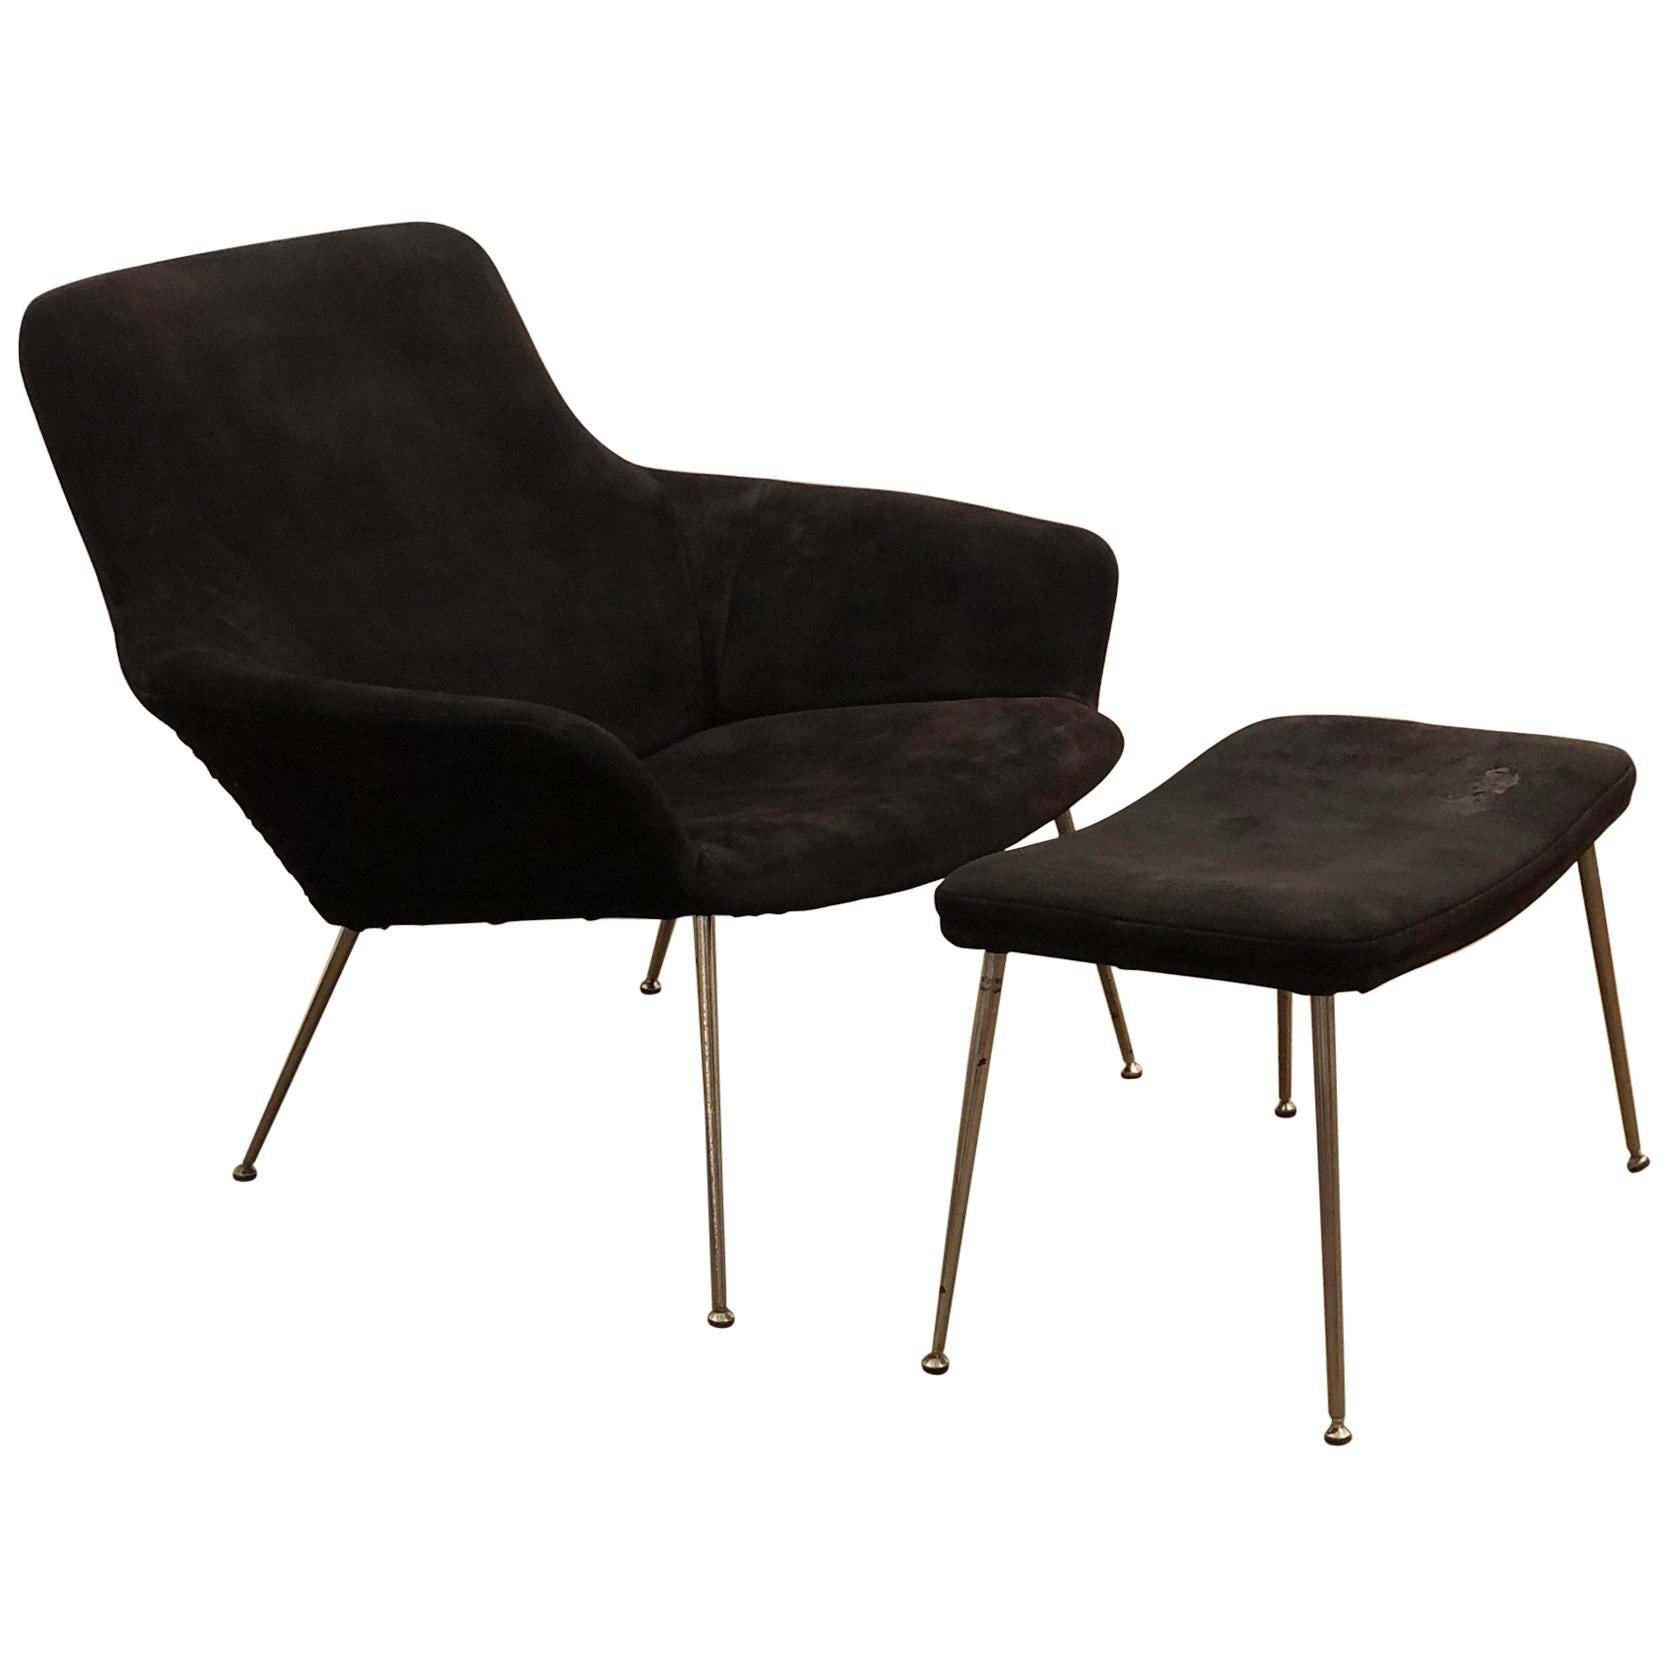 Danish Modern Striking Black Suede and Chrome Legs Lounge Chair and Ottoman